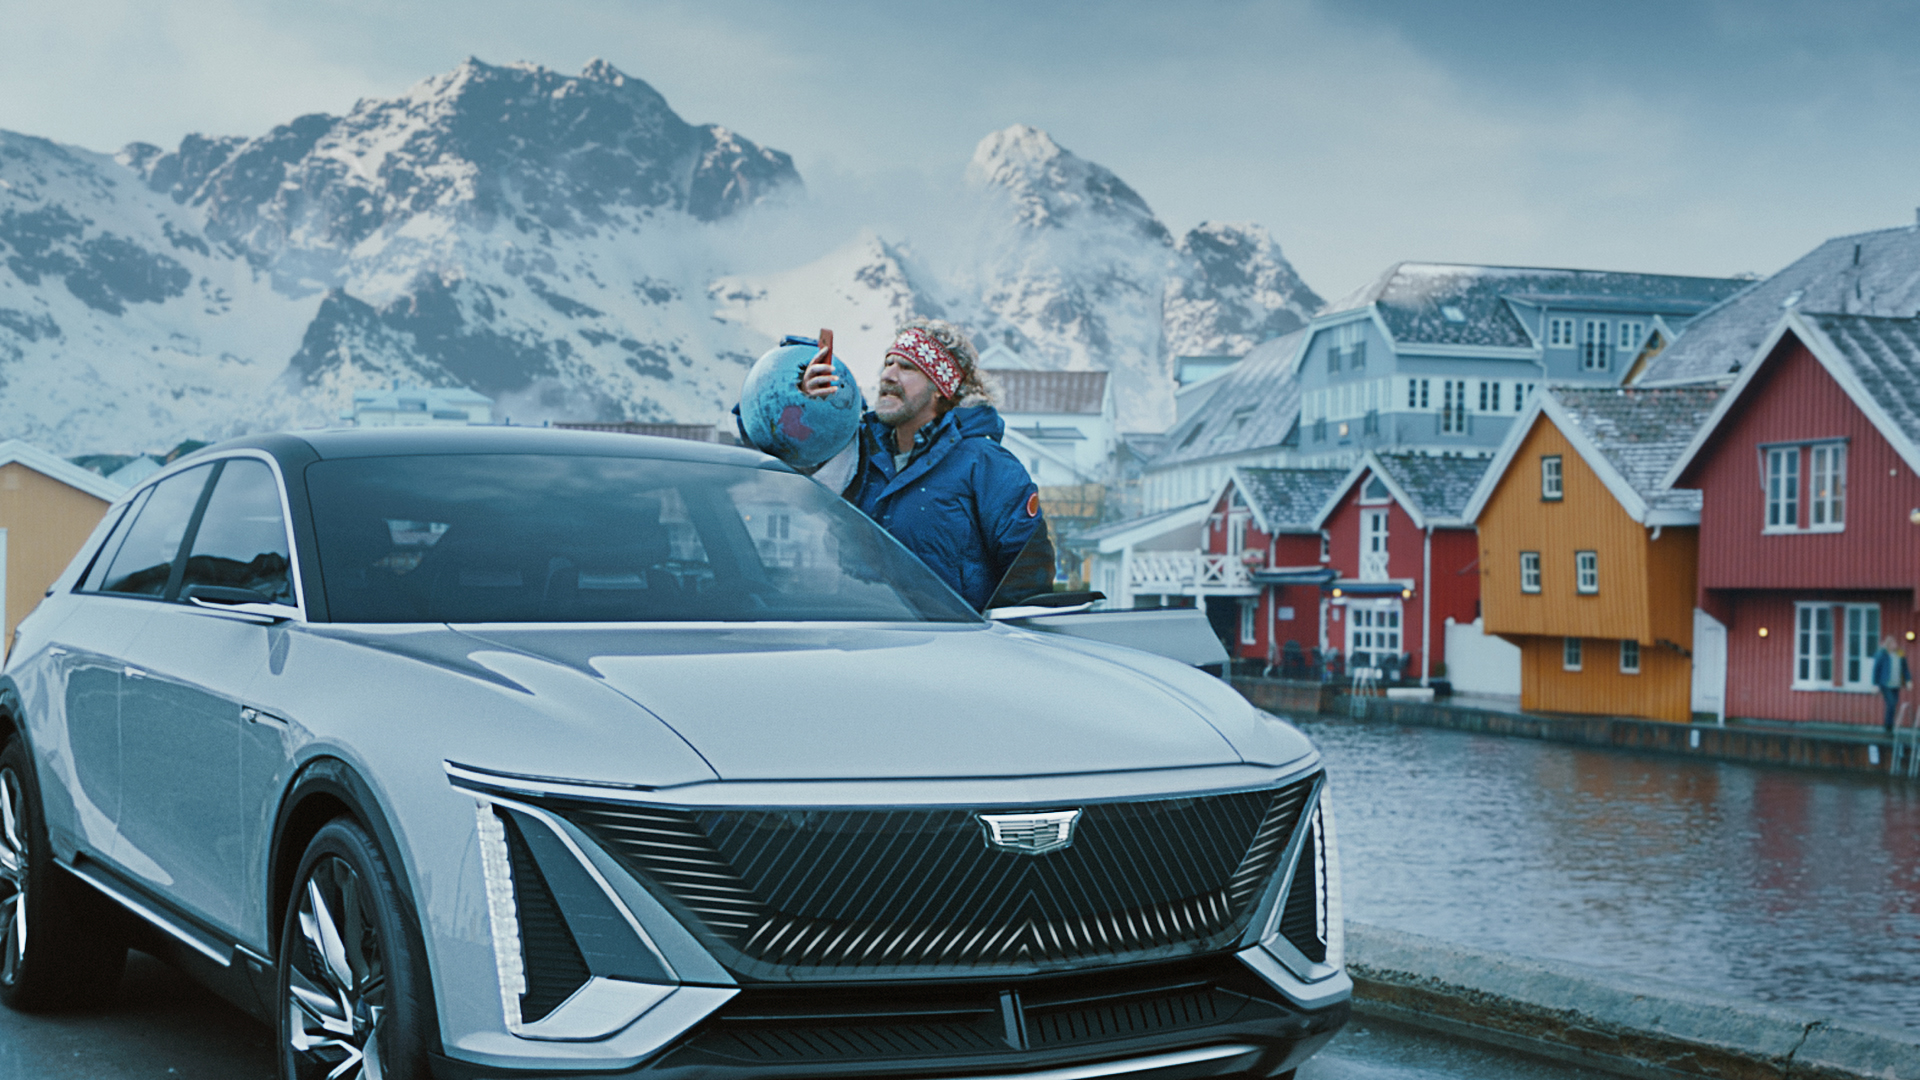 Will Ferrell GM Electric Car Super Bowl Ad Has Norway Taking an EV